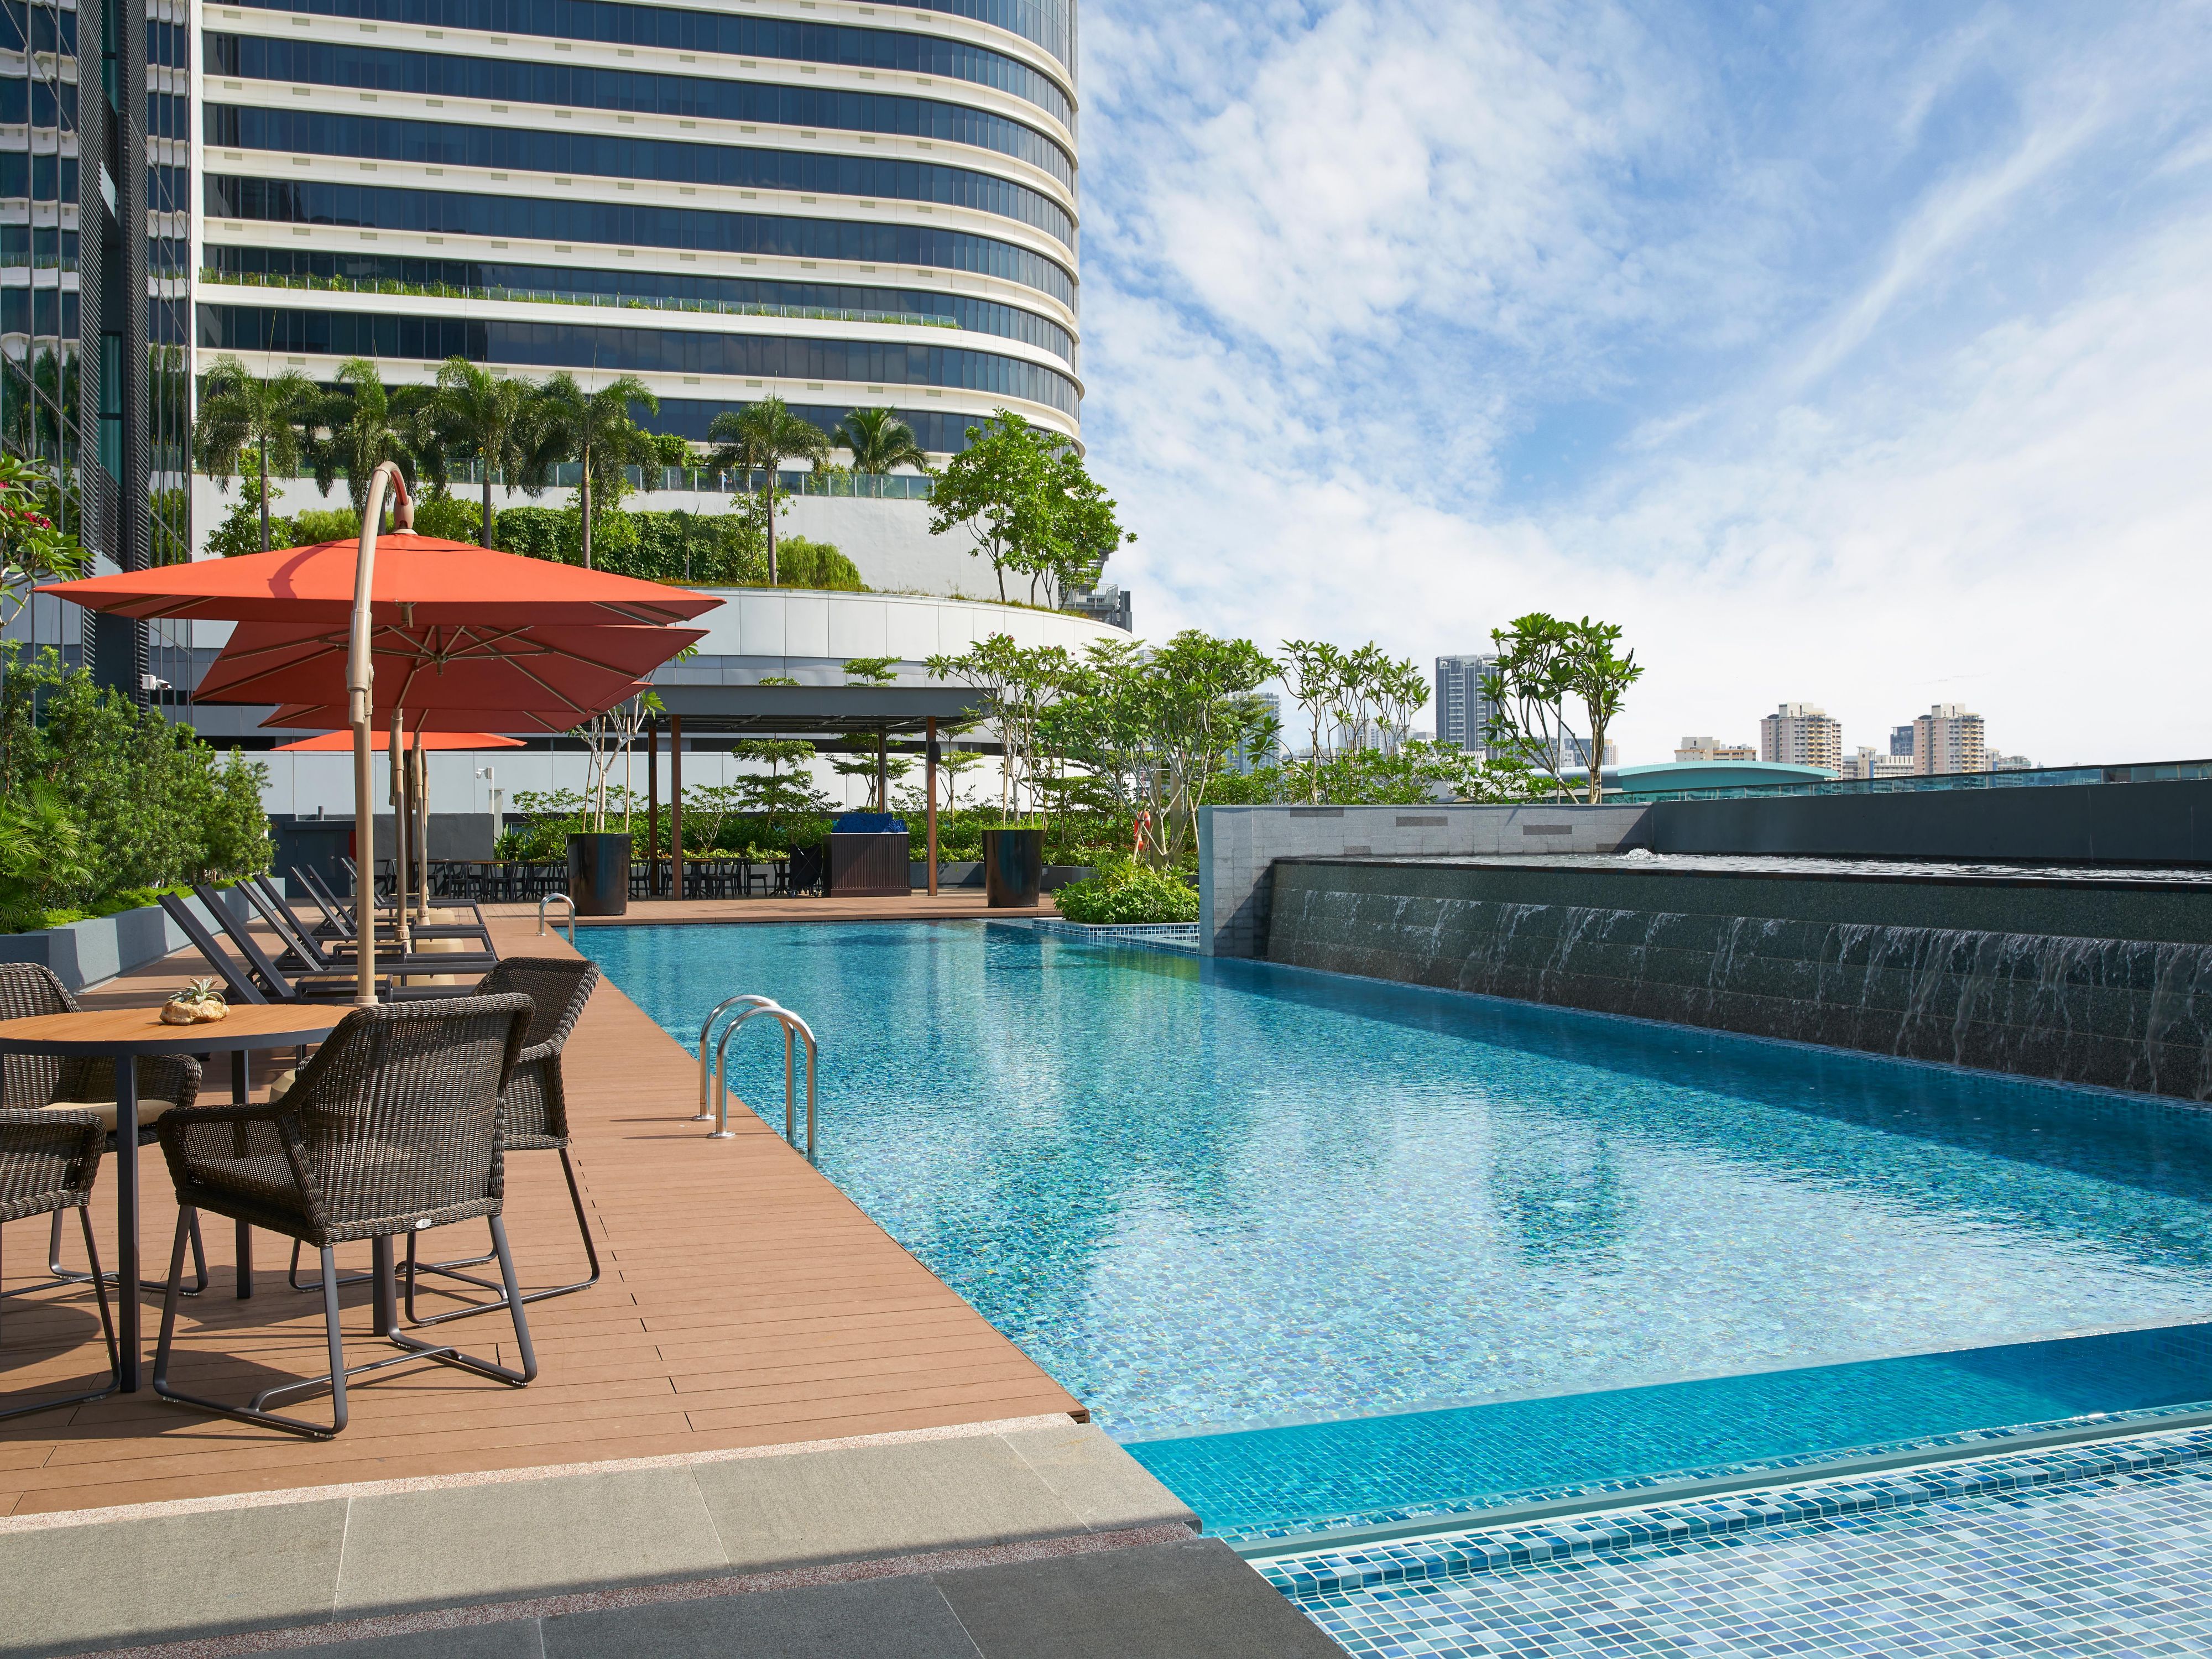 Located on Level 5, right next to our all-day dining restaurant and bar, our outdoor pool will give you relaxation and rejuvenation like no other! Book your stay now to relax while you enjoy stunning city views.